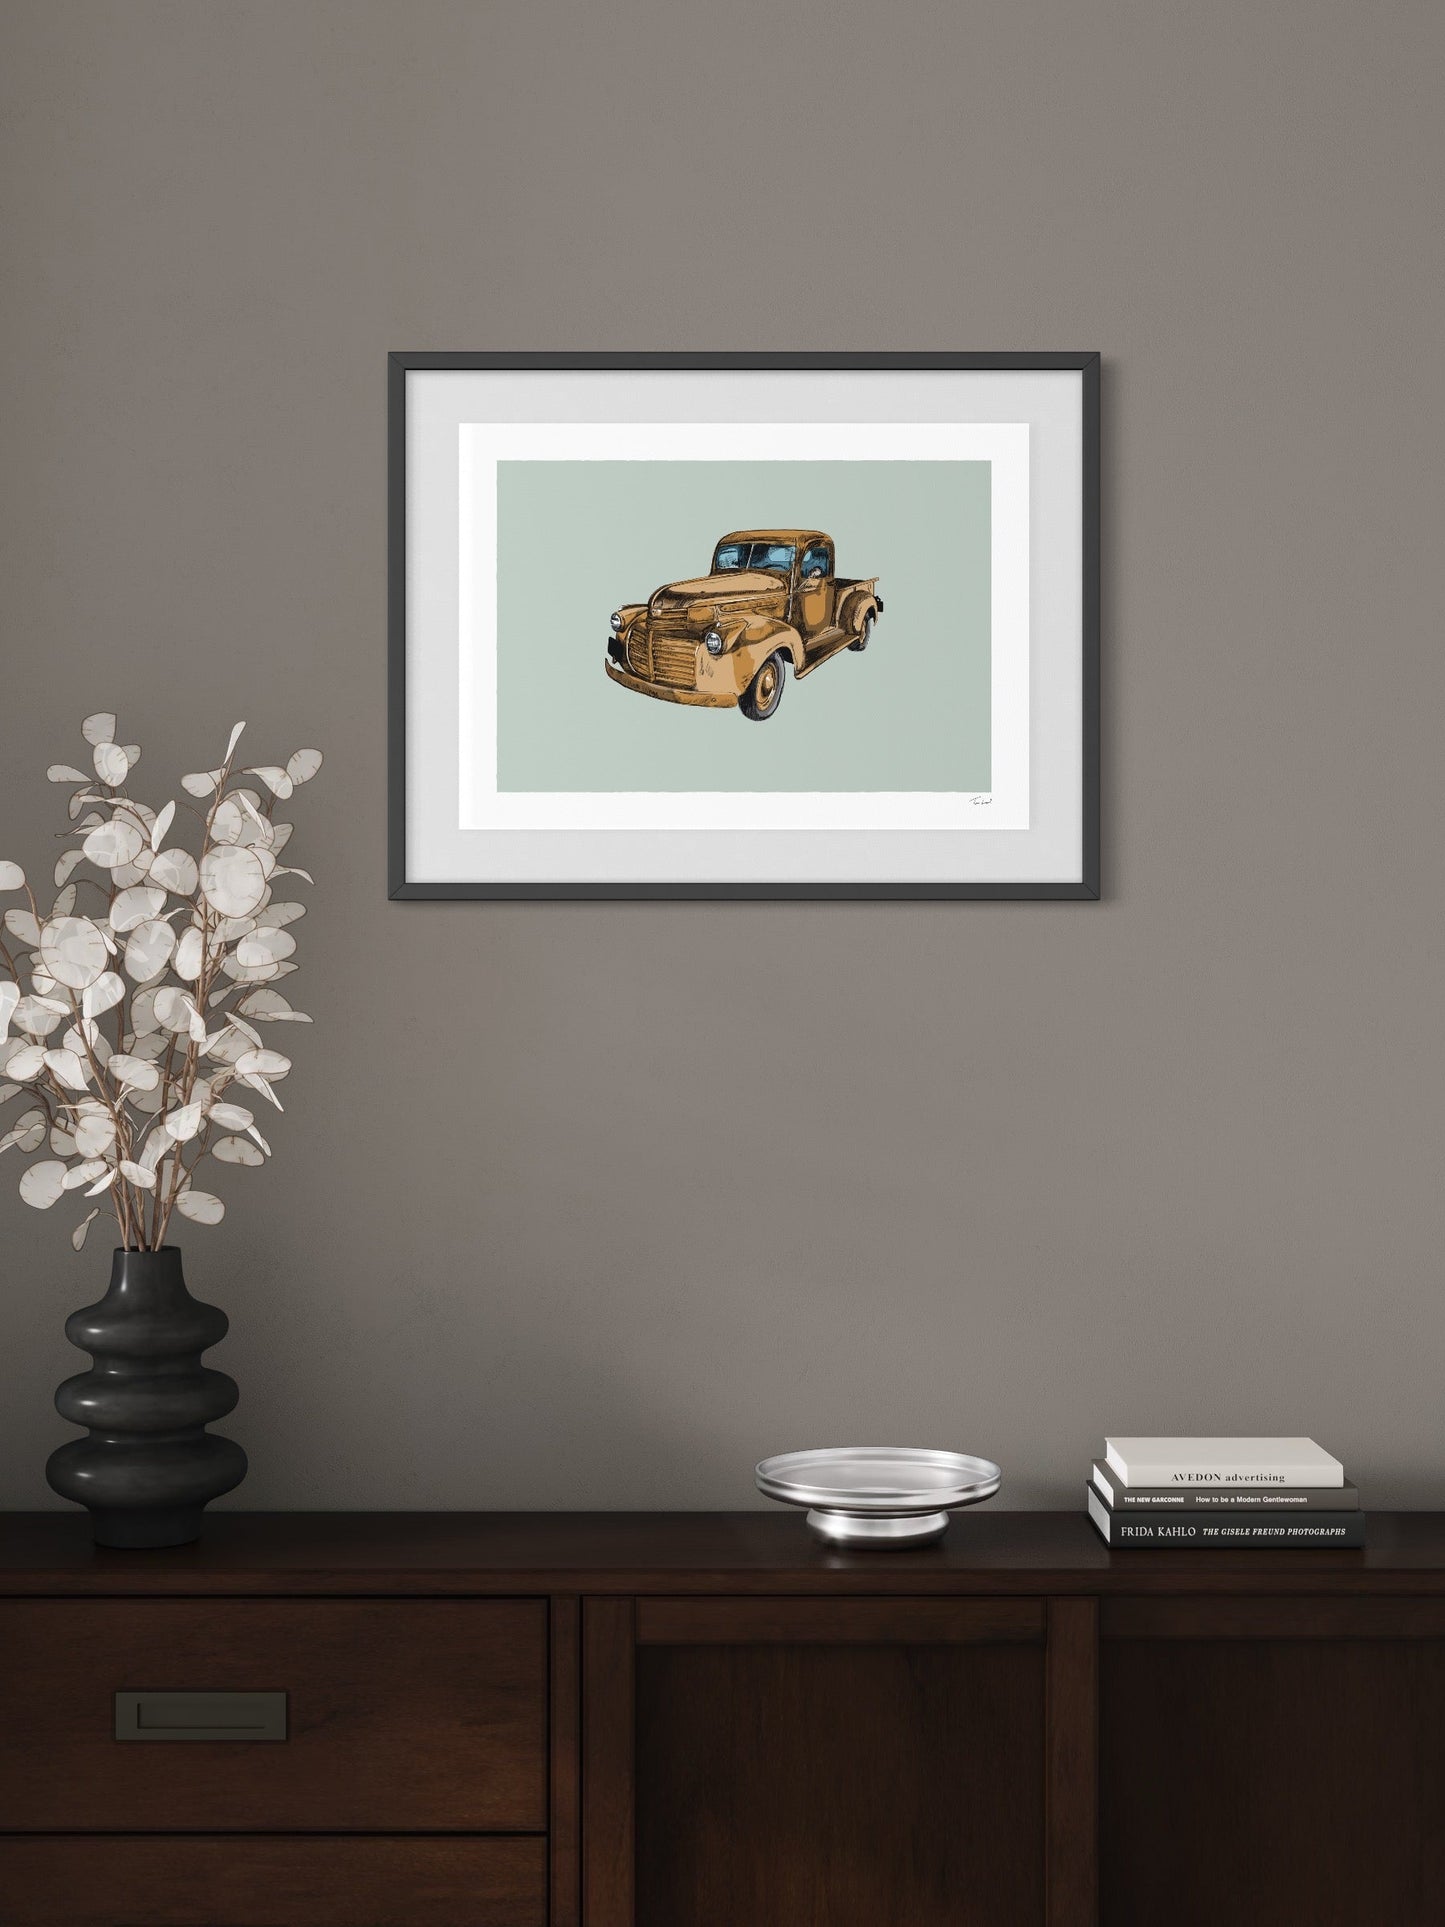 This image shows a giclee wall art print by Tom Laird Illustration of the American classic car, the GMC pickup, framed in a beautiful living room with tasteful modern home decor. This art print of a rusty brown example is available from Tom Laird Illustration in a variety of sizes.